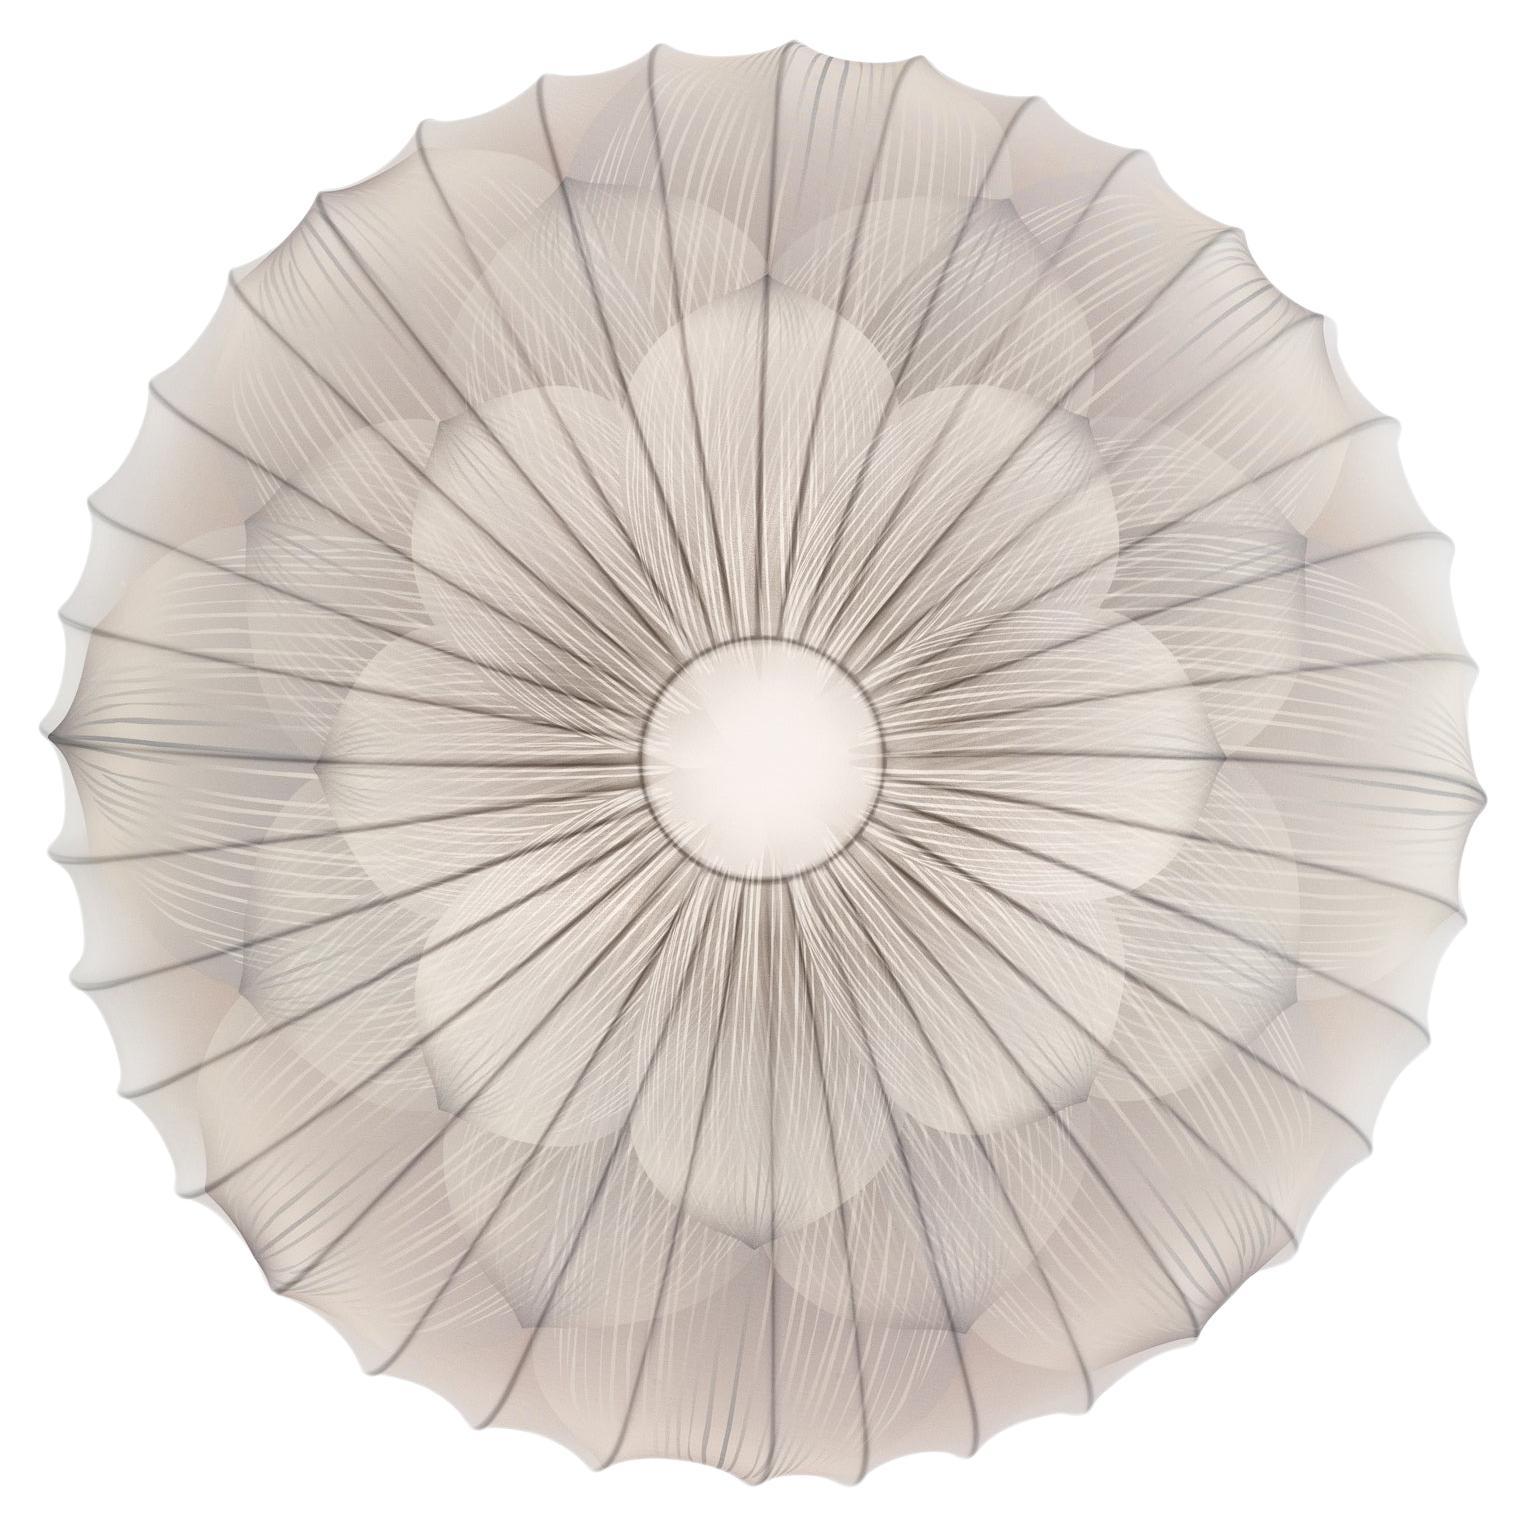 Axolight Muse Large Ceiling Light in Flower Pattern with White Metal Finish